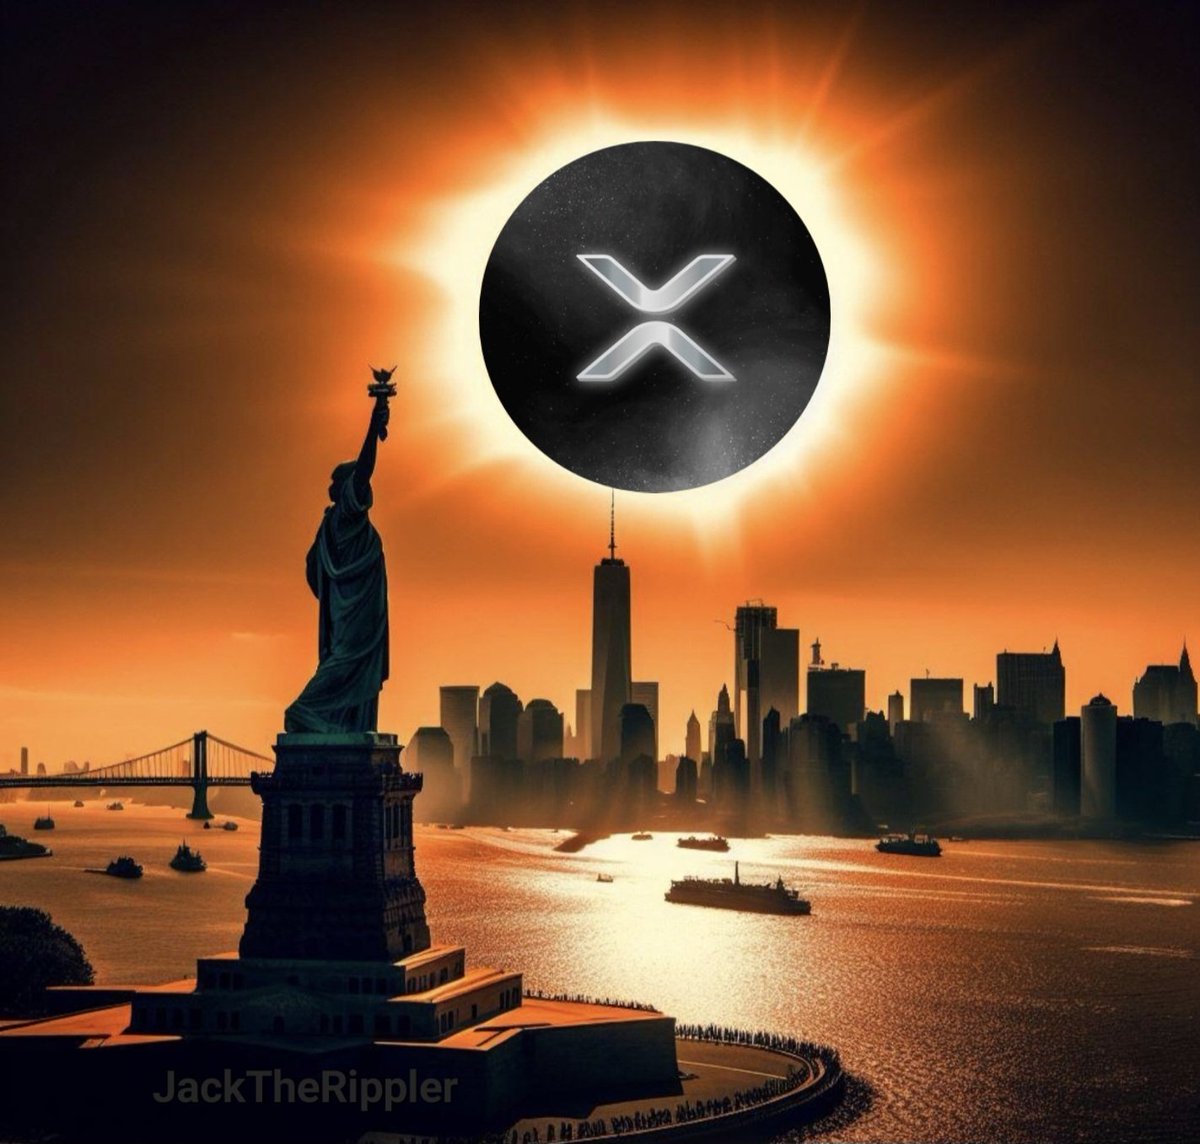 The SEC v. RIPPLE case will come to an End and #XRP will become the first digital asset with FULL regulatory clarity in the United States of America for cross-border settlements! 3-5 digits per XRP is inevitable.